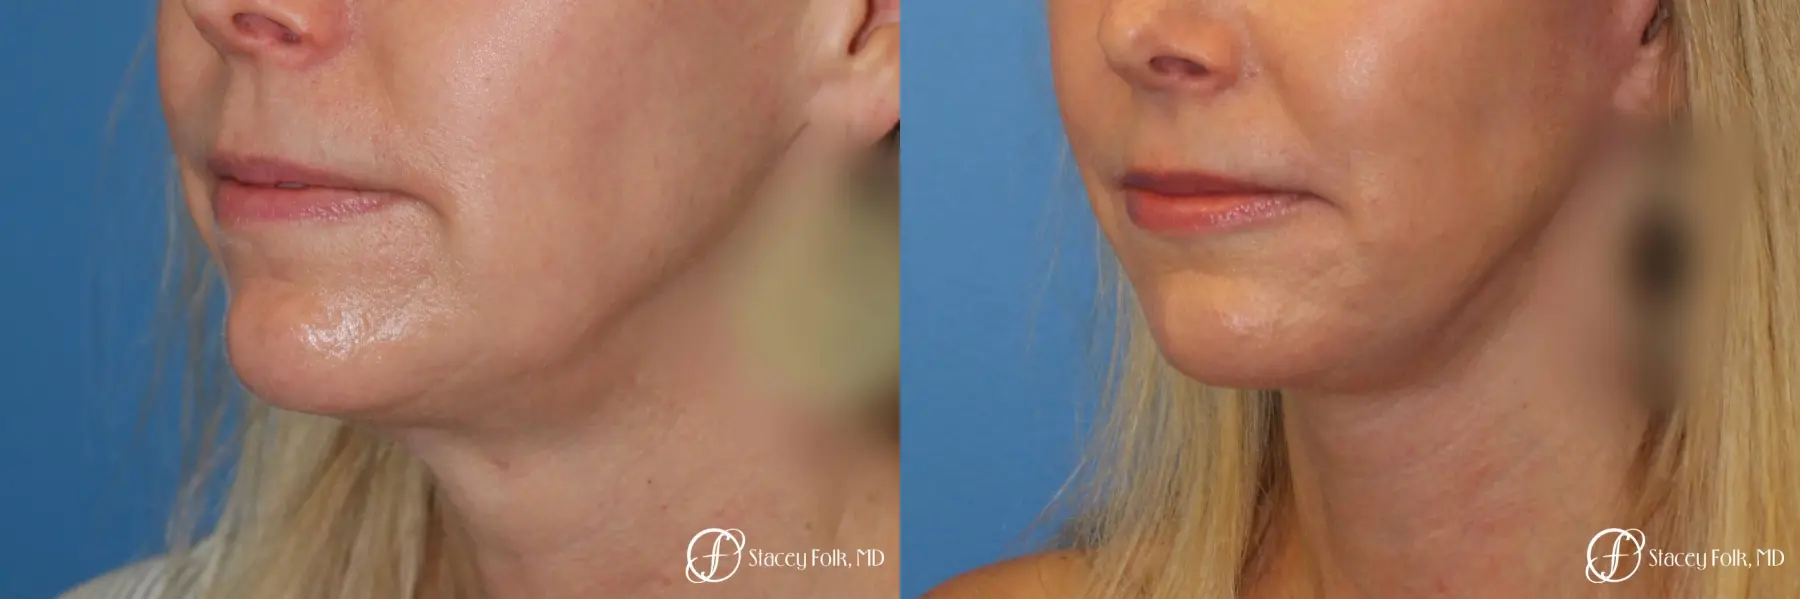 Denver Facial Rejuvenation Face Lift and Fat Injections 7126 - Before and After 2